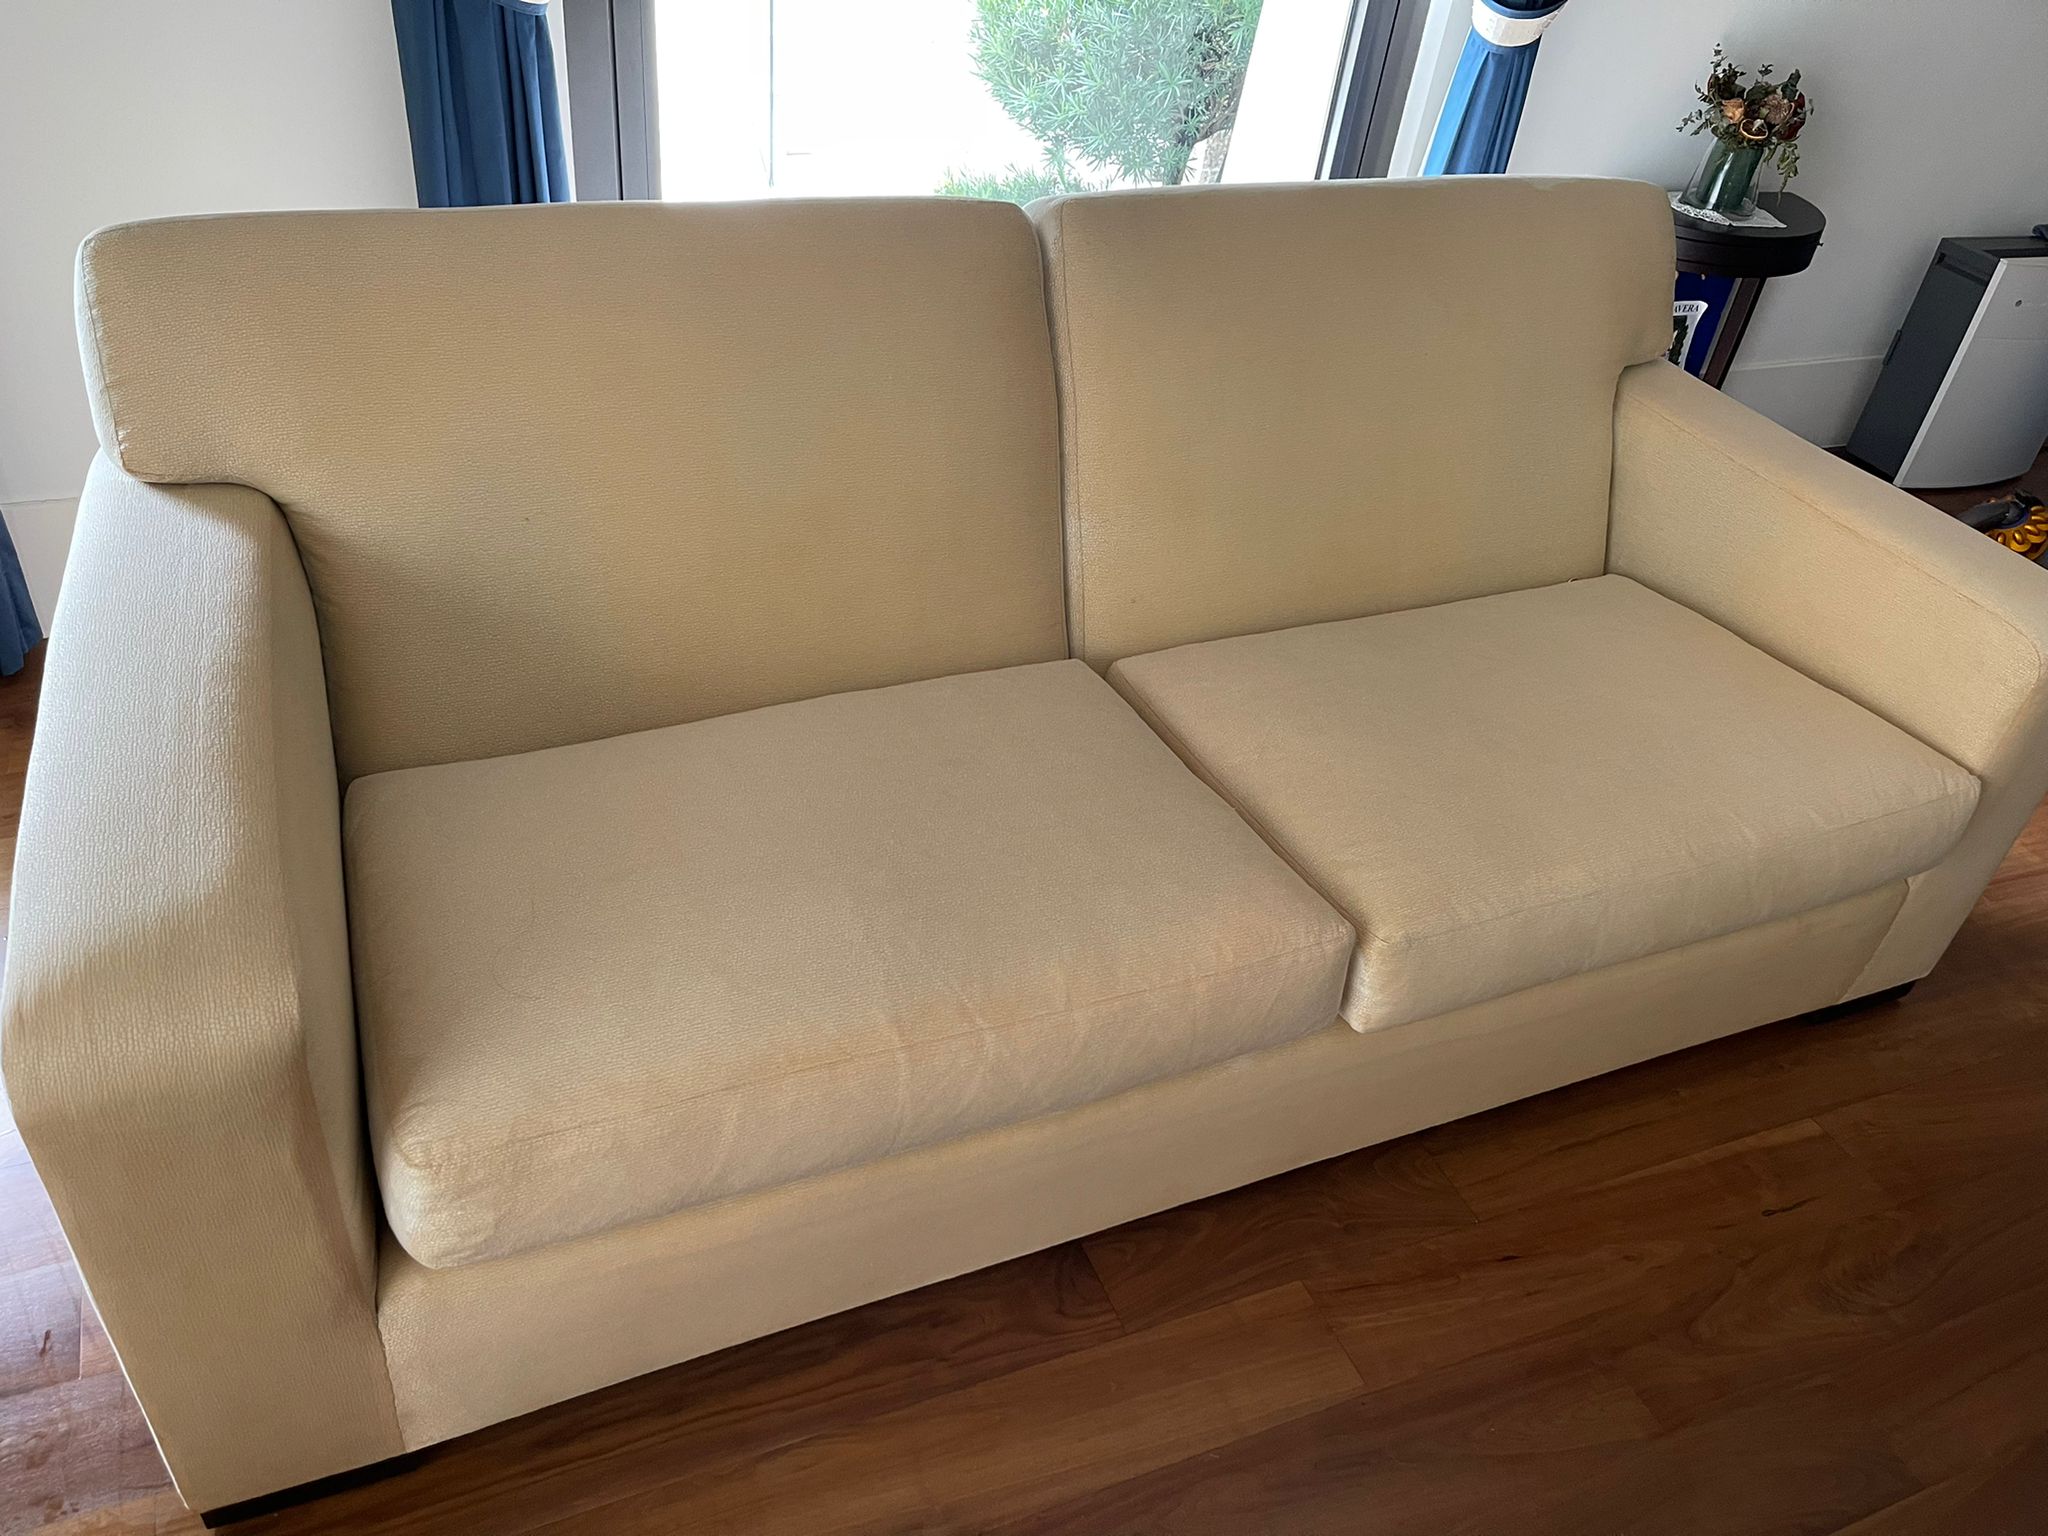 EASYCLEAN SG | Our Services - UPHOLSTERY SHAMPOOING